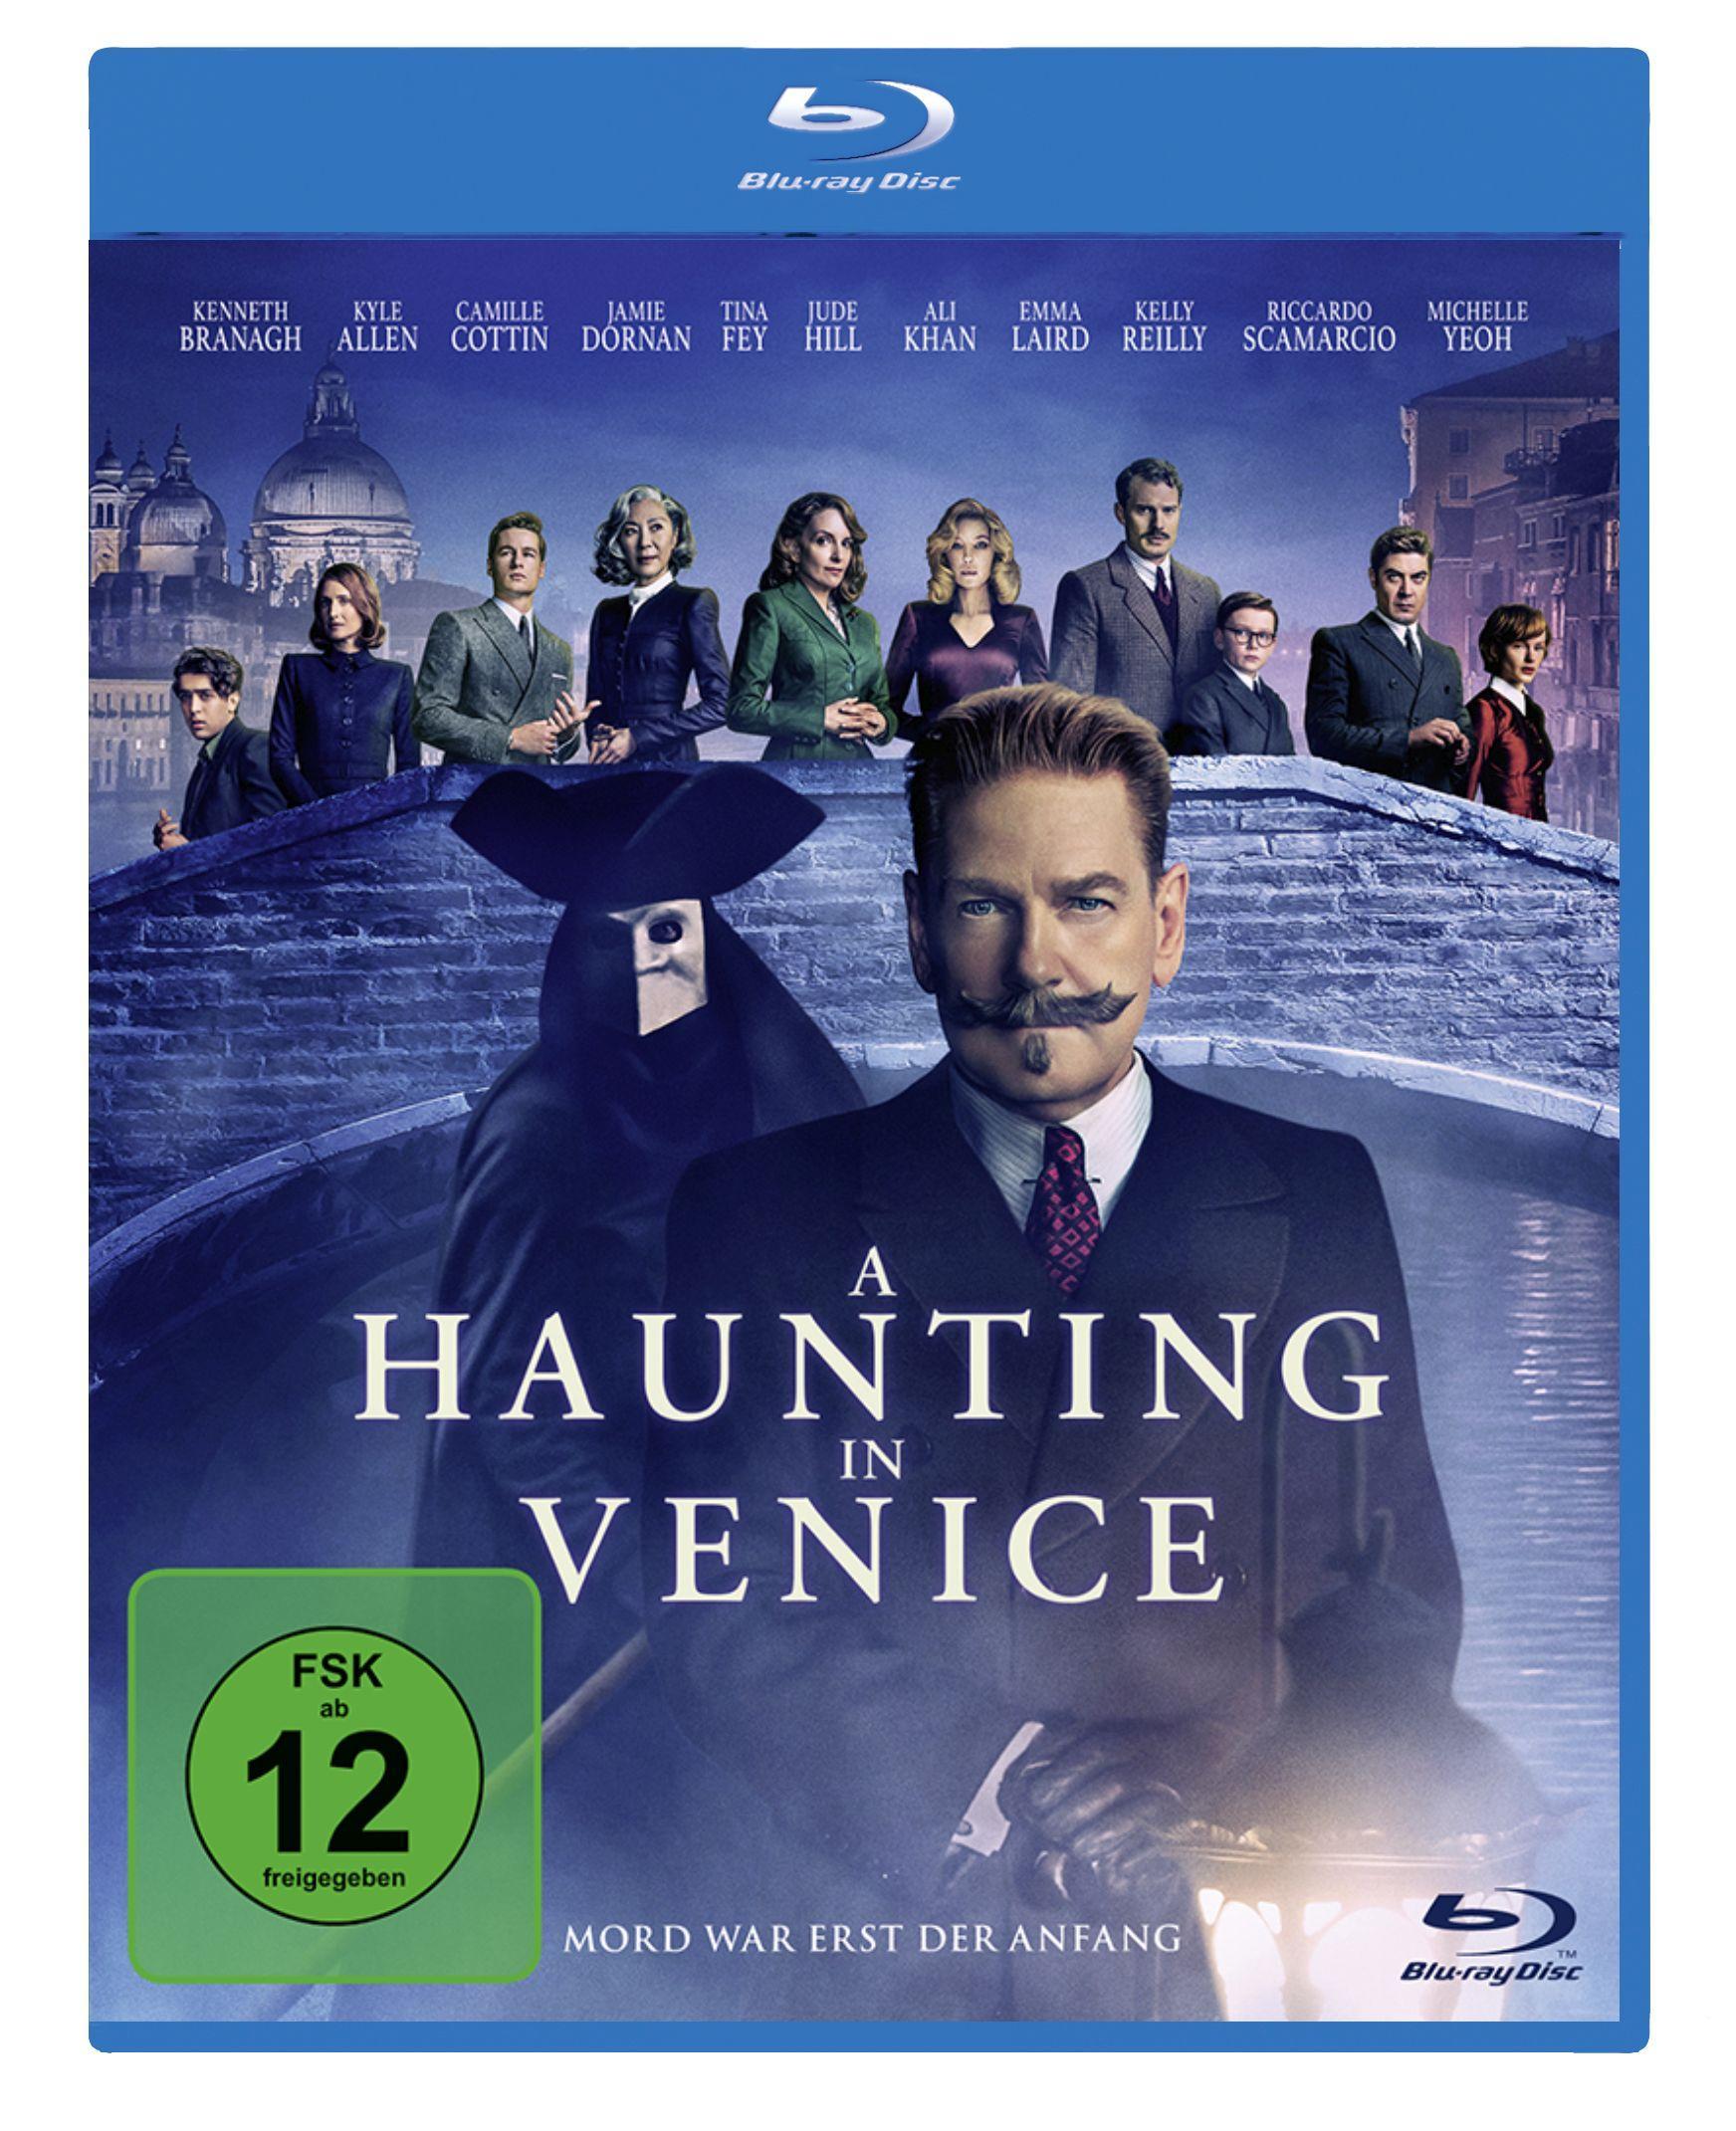 A Haunting in Venice BD